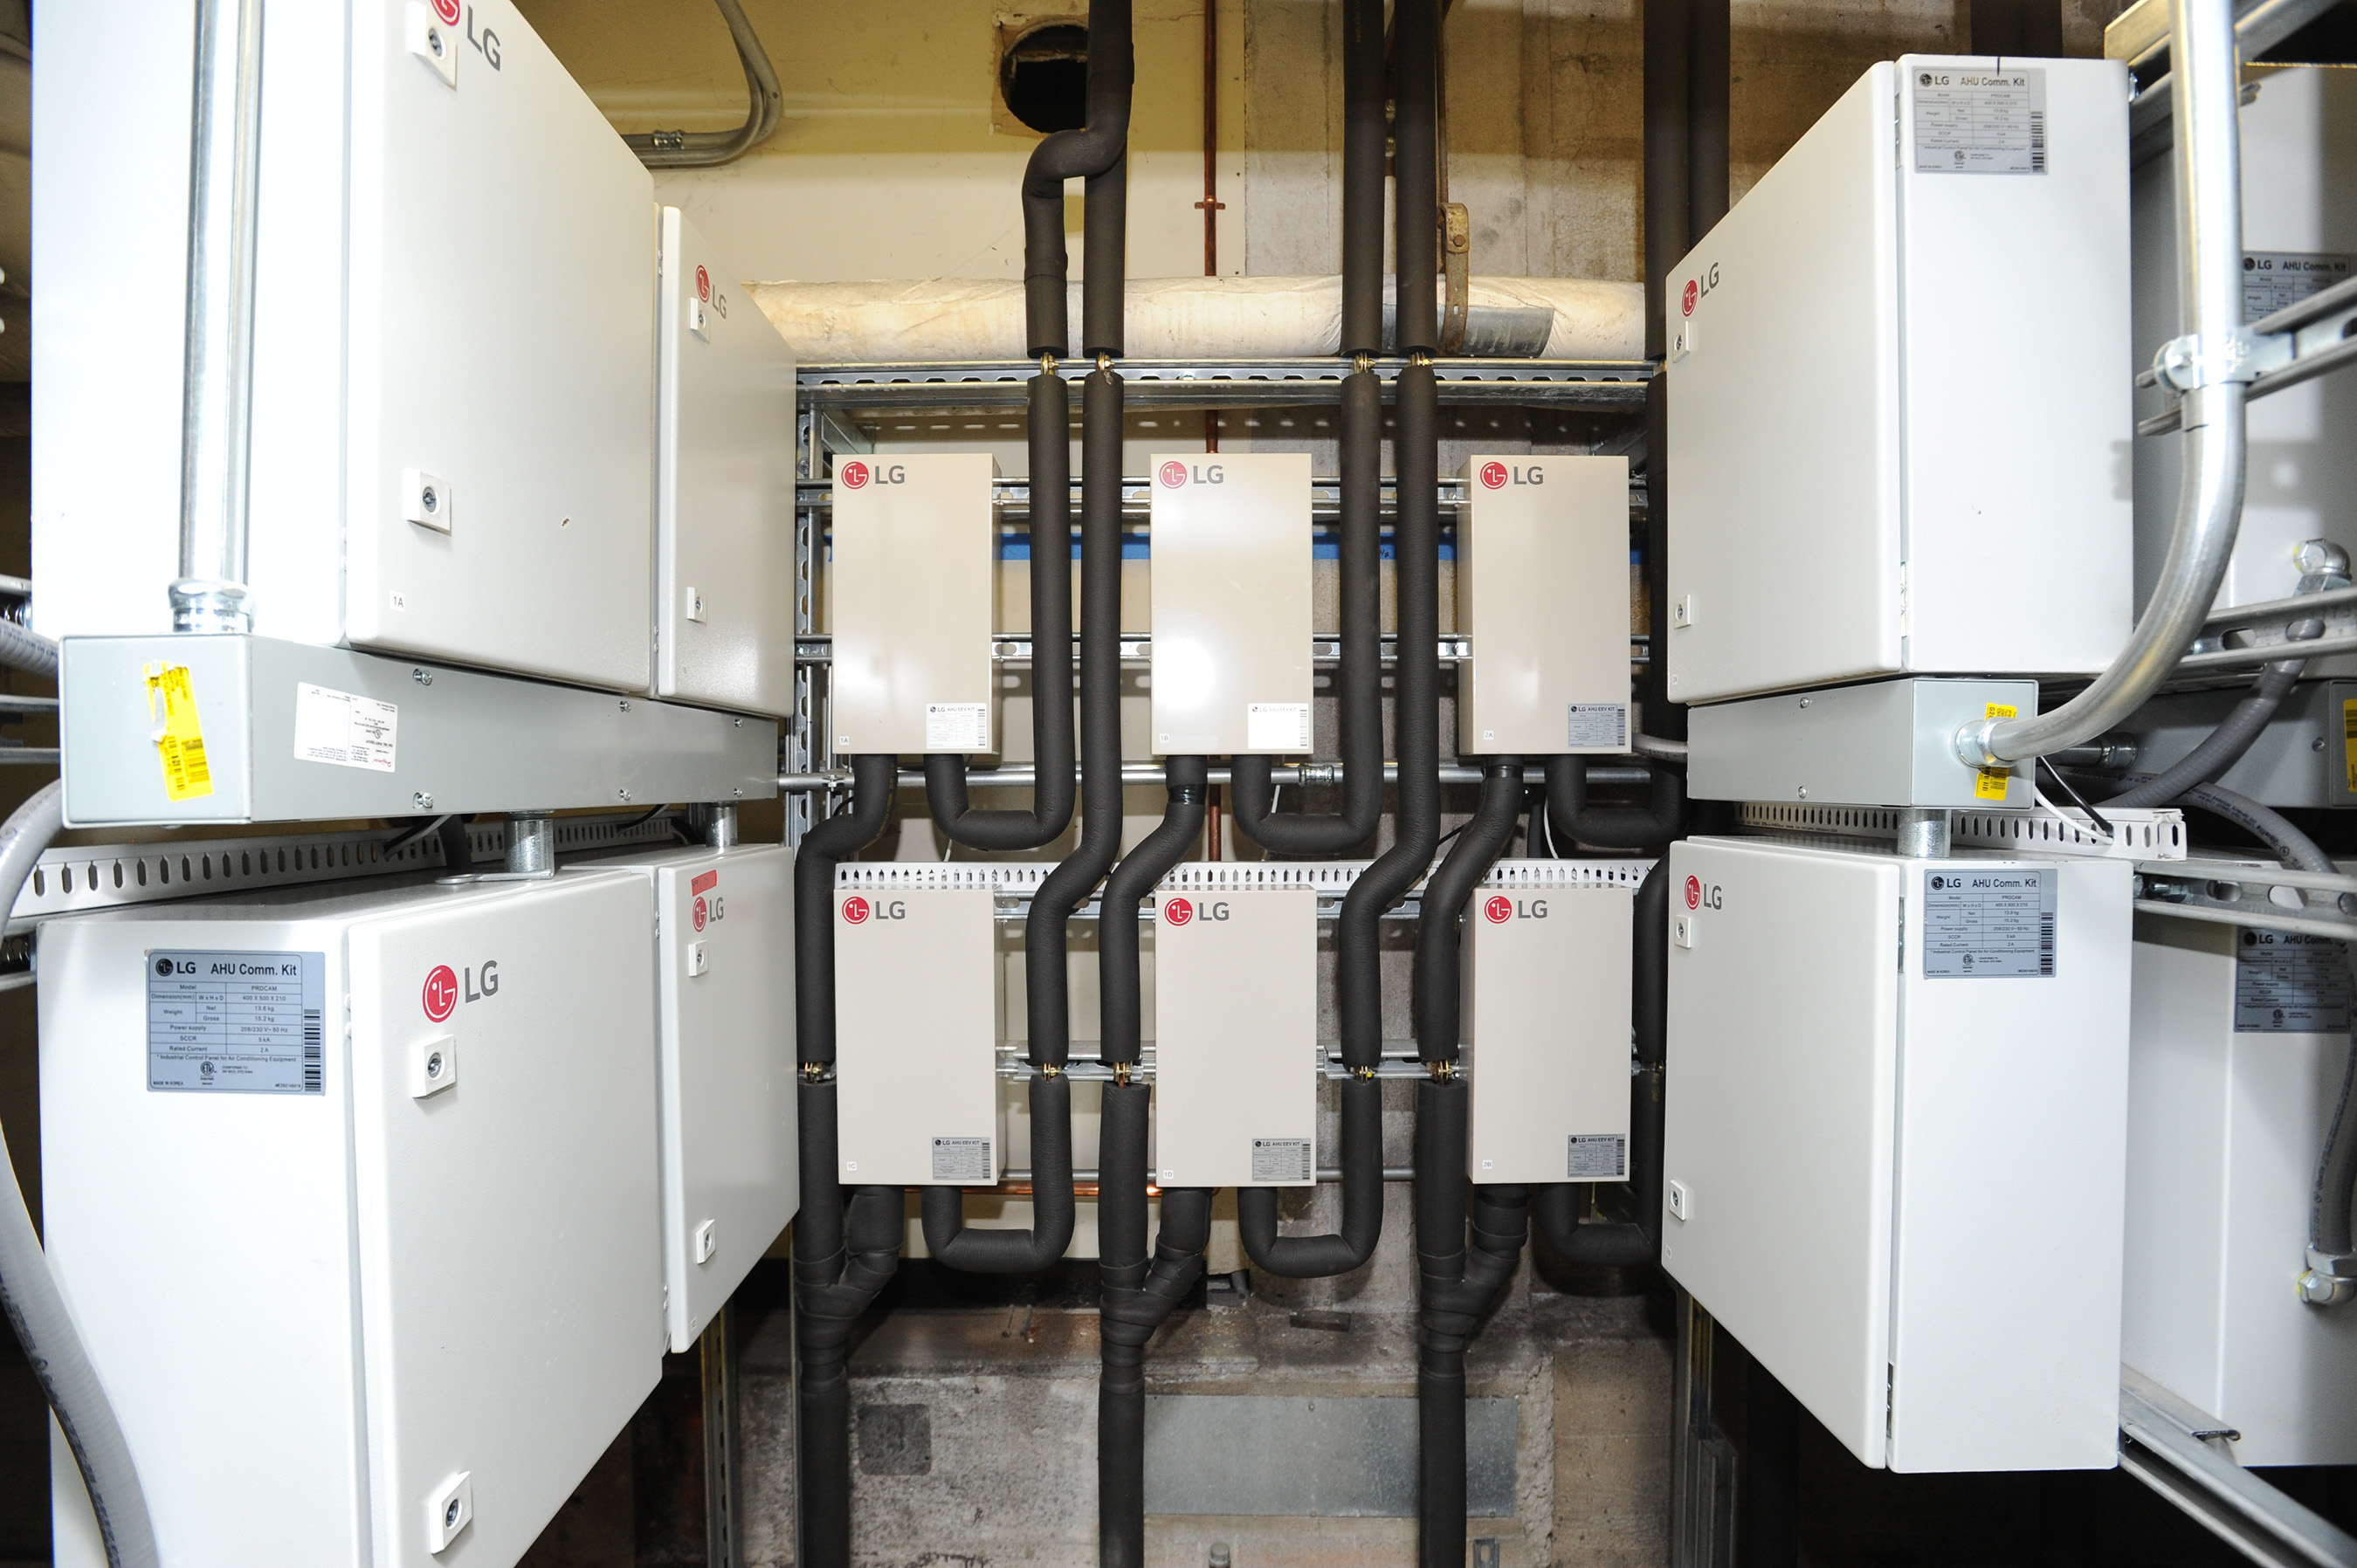 The LG AHU Conversion Kits, consisting of EEV and Communication kits worked to effectively dehumidify and condition the air to increase comfort exponentially within the main theater space.